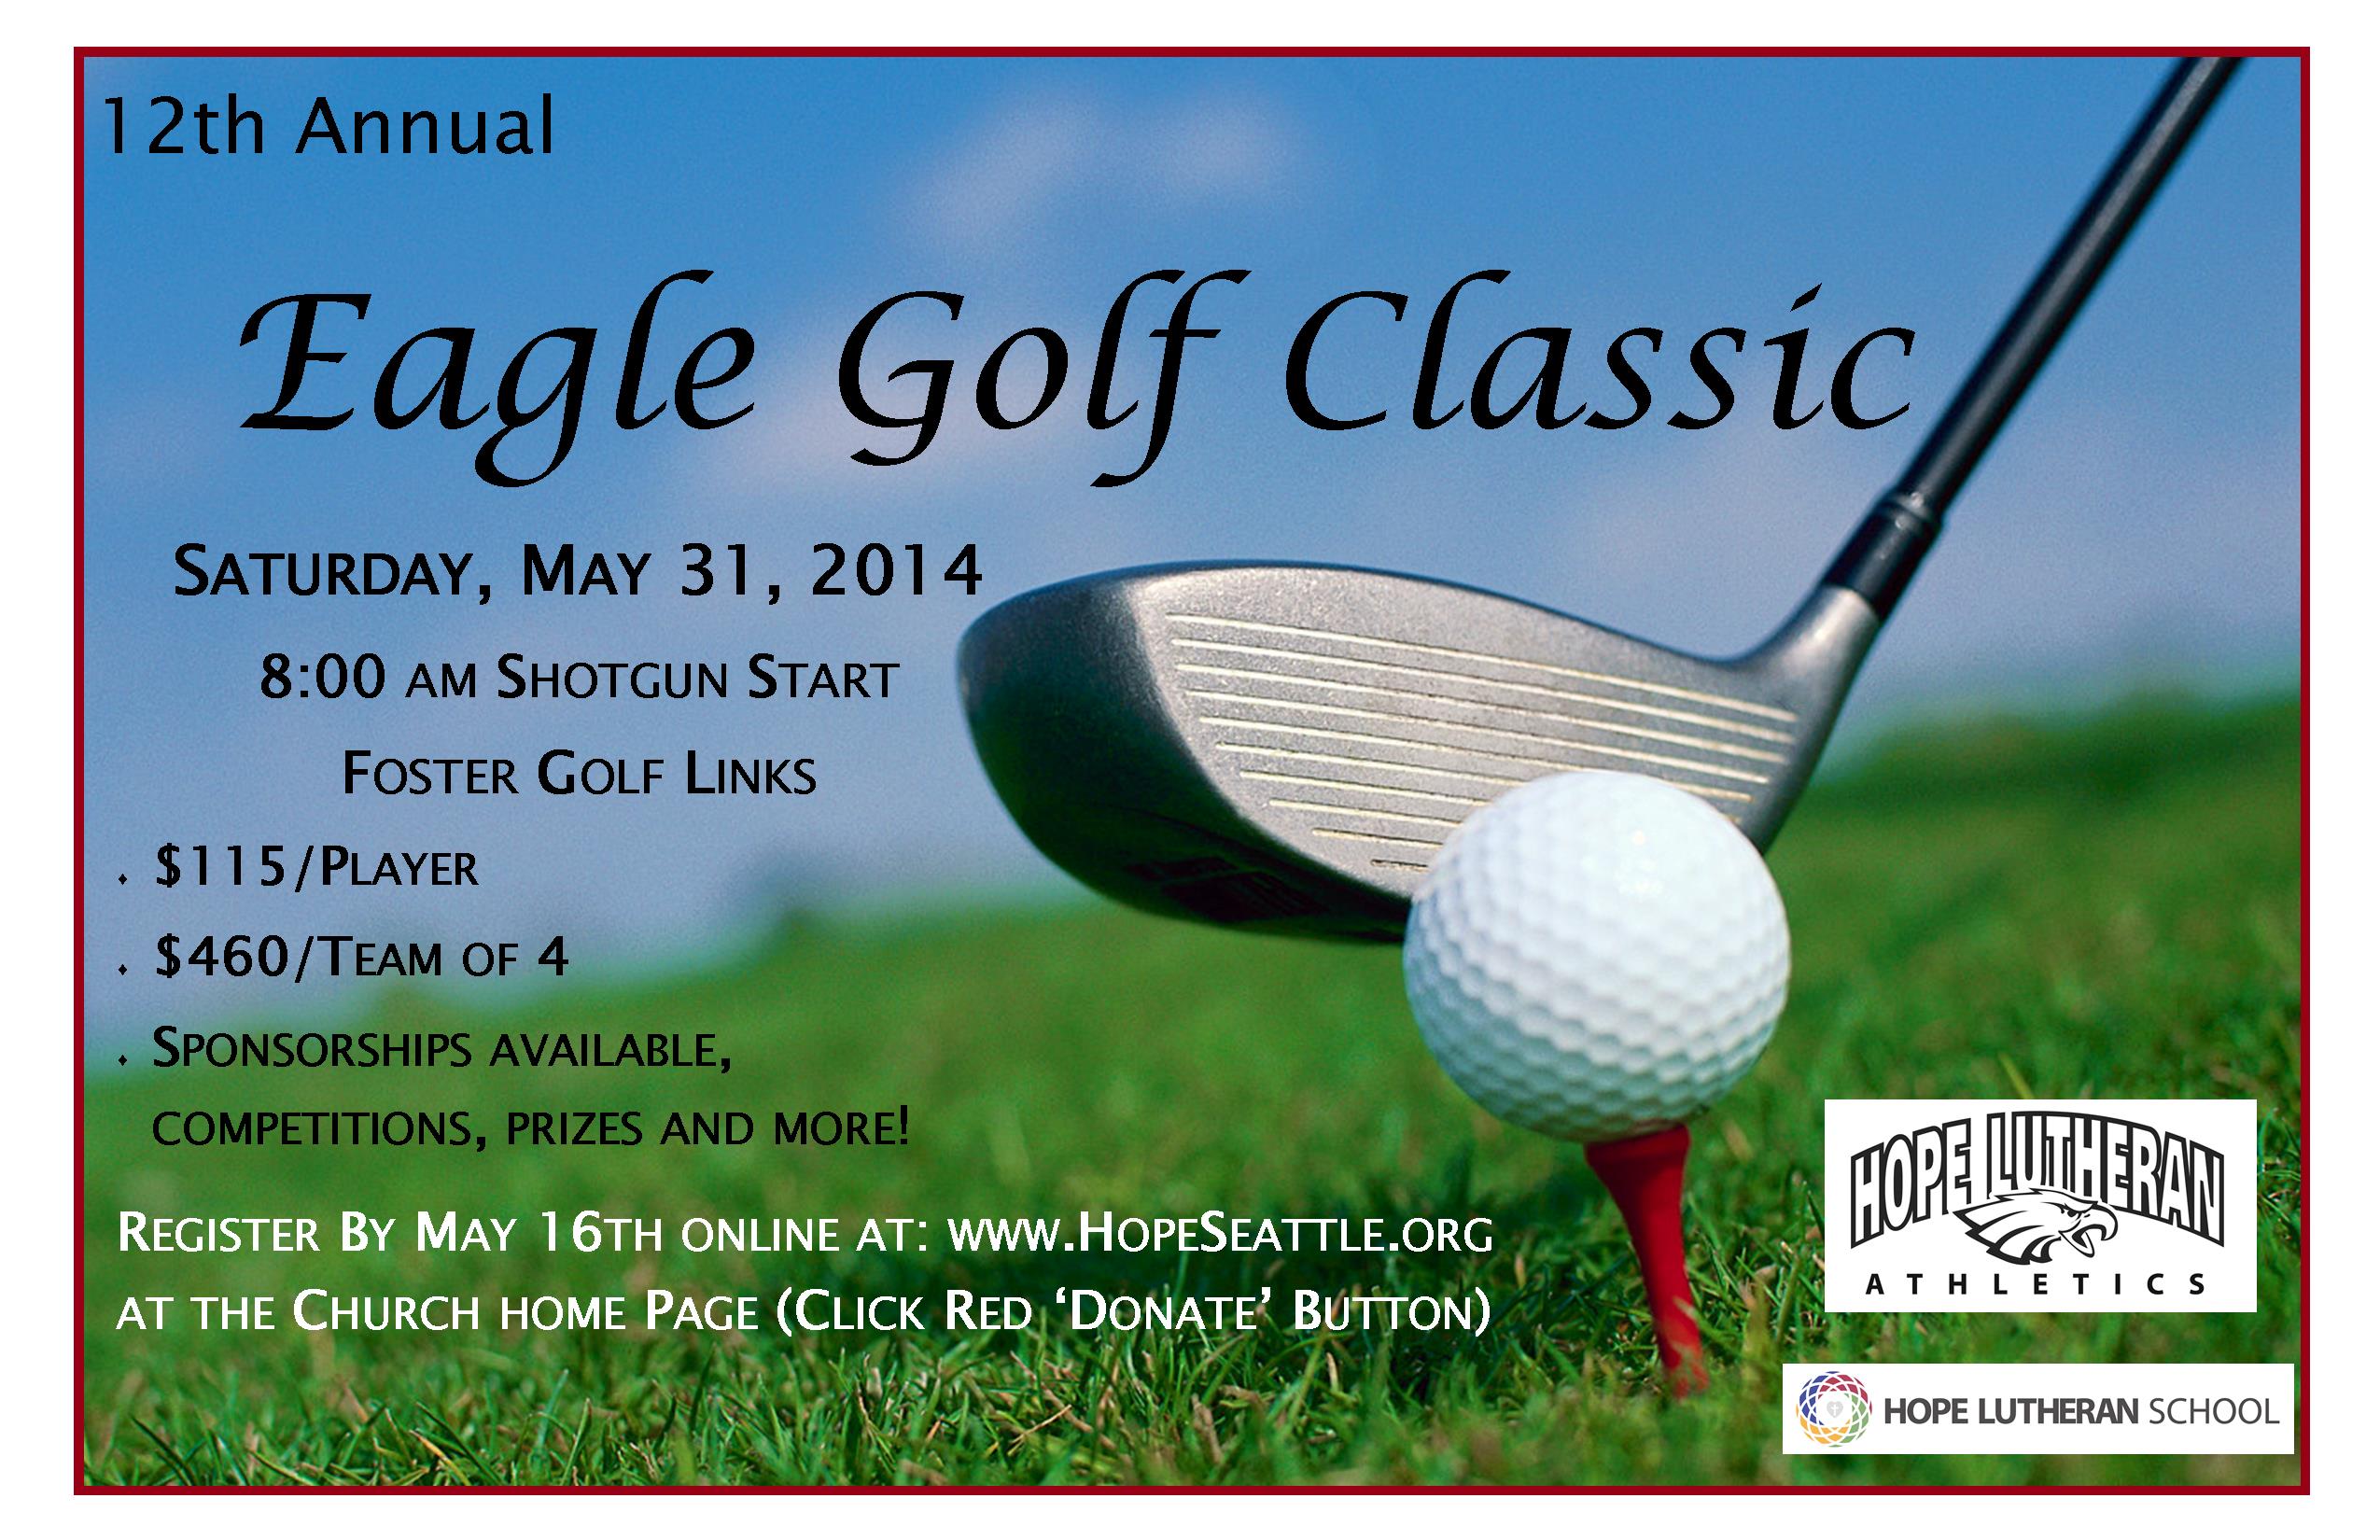 Register for The Eagle Golf Classic!